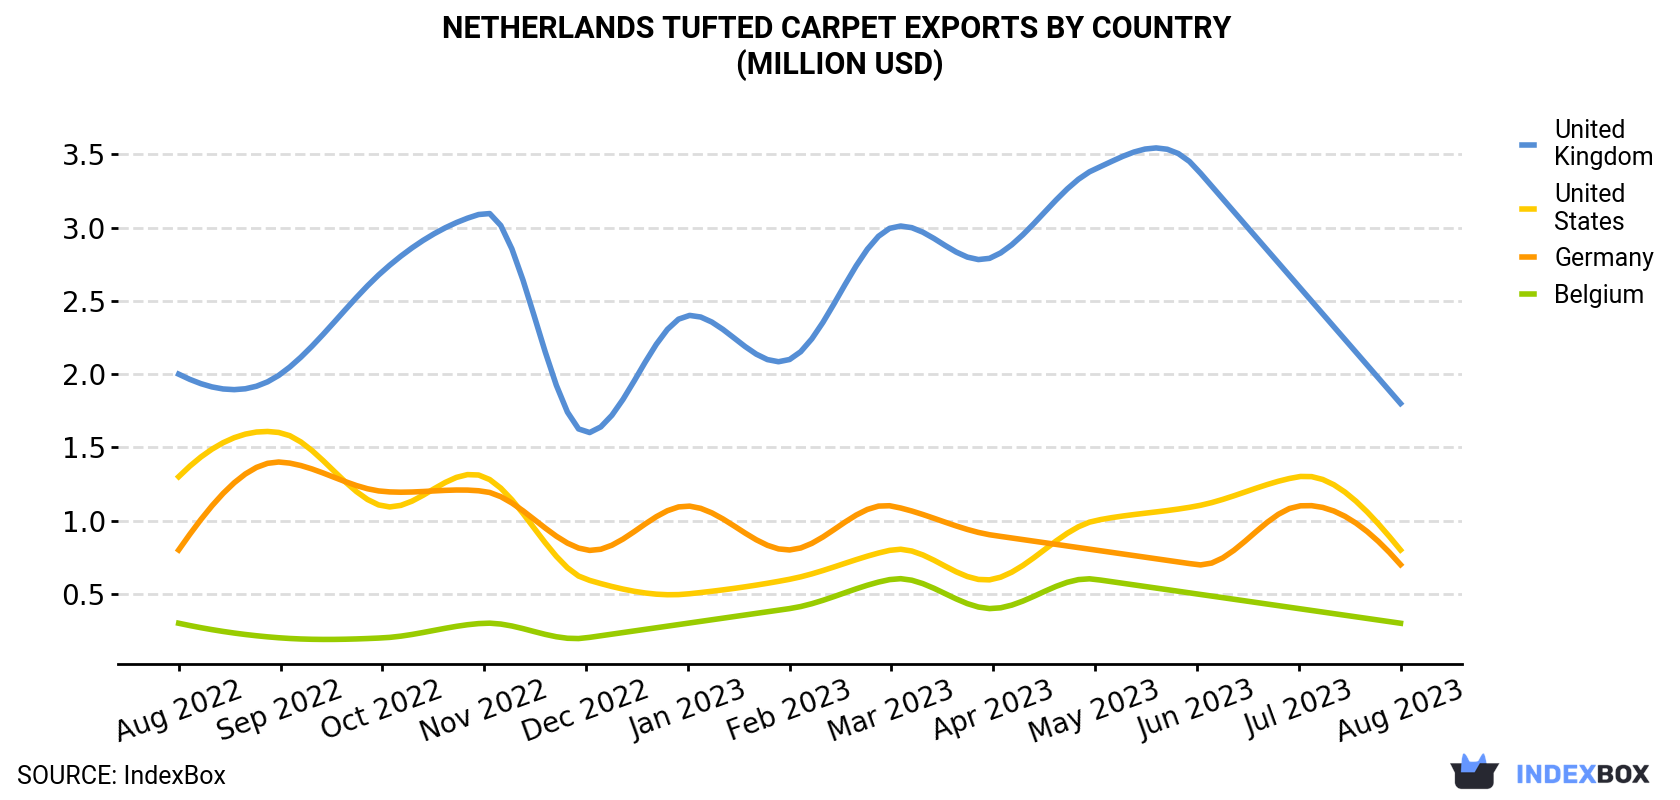 Netherlands Tufted Carpet Exports By Country (Million USD)